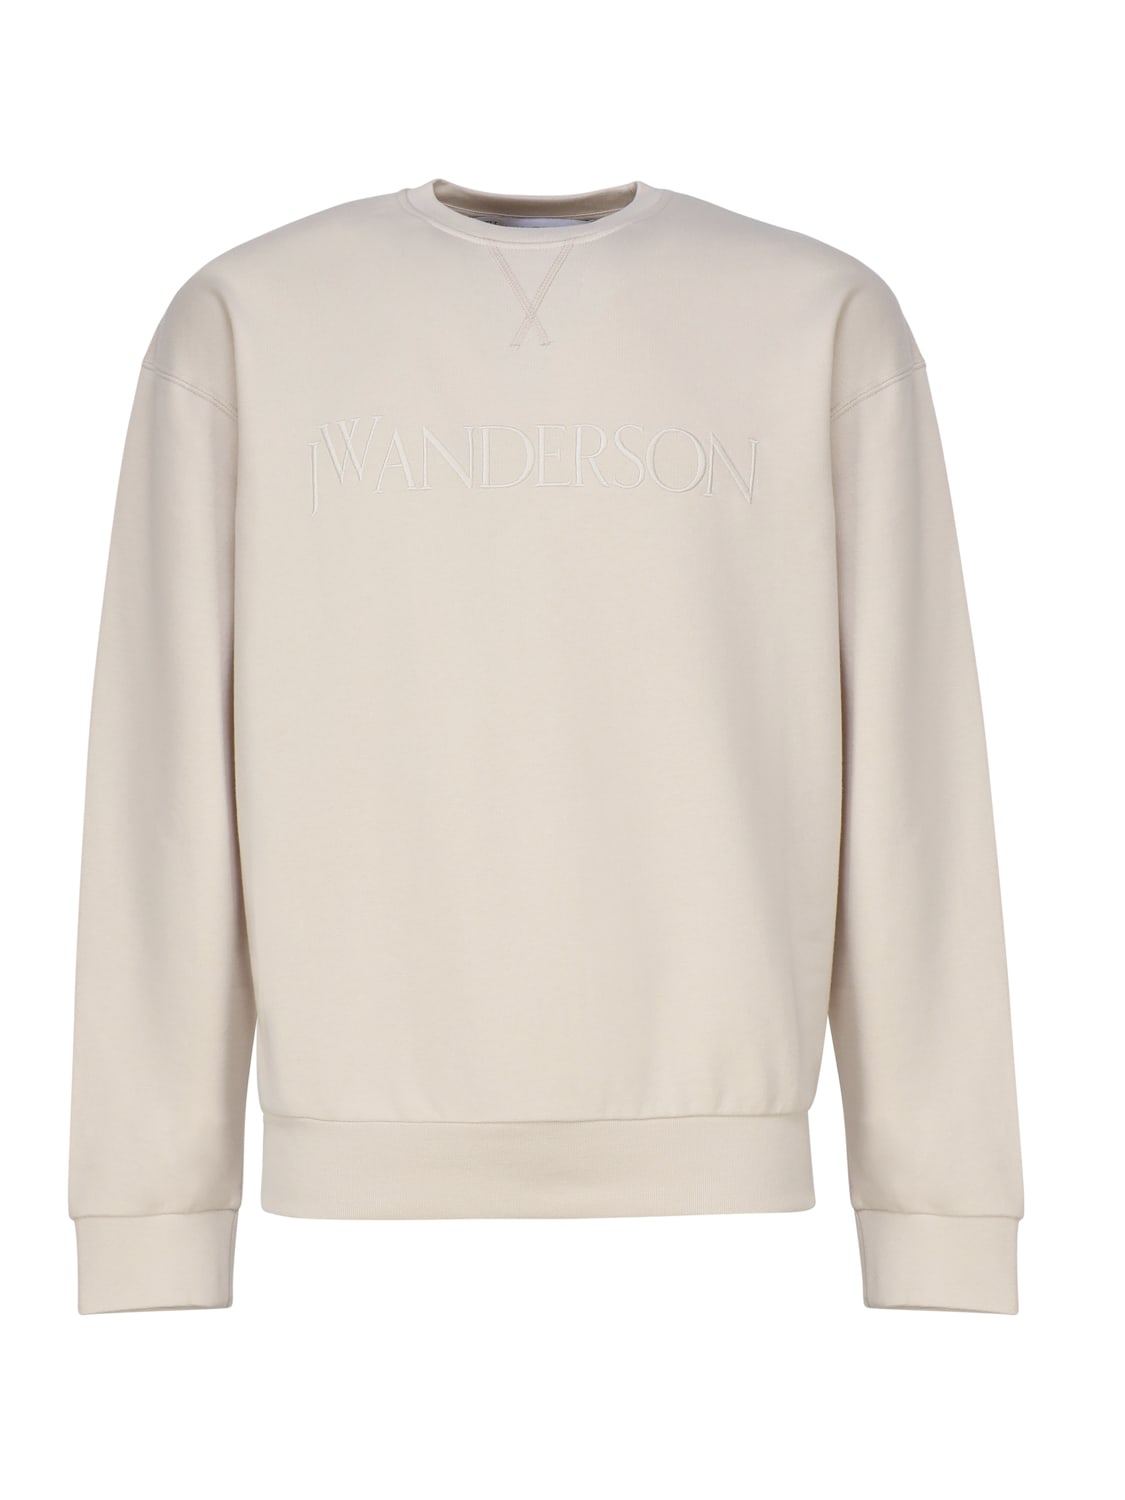 JW ANDERSON SWEATSHIRT WITH EMBROIDERY